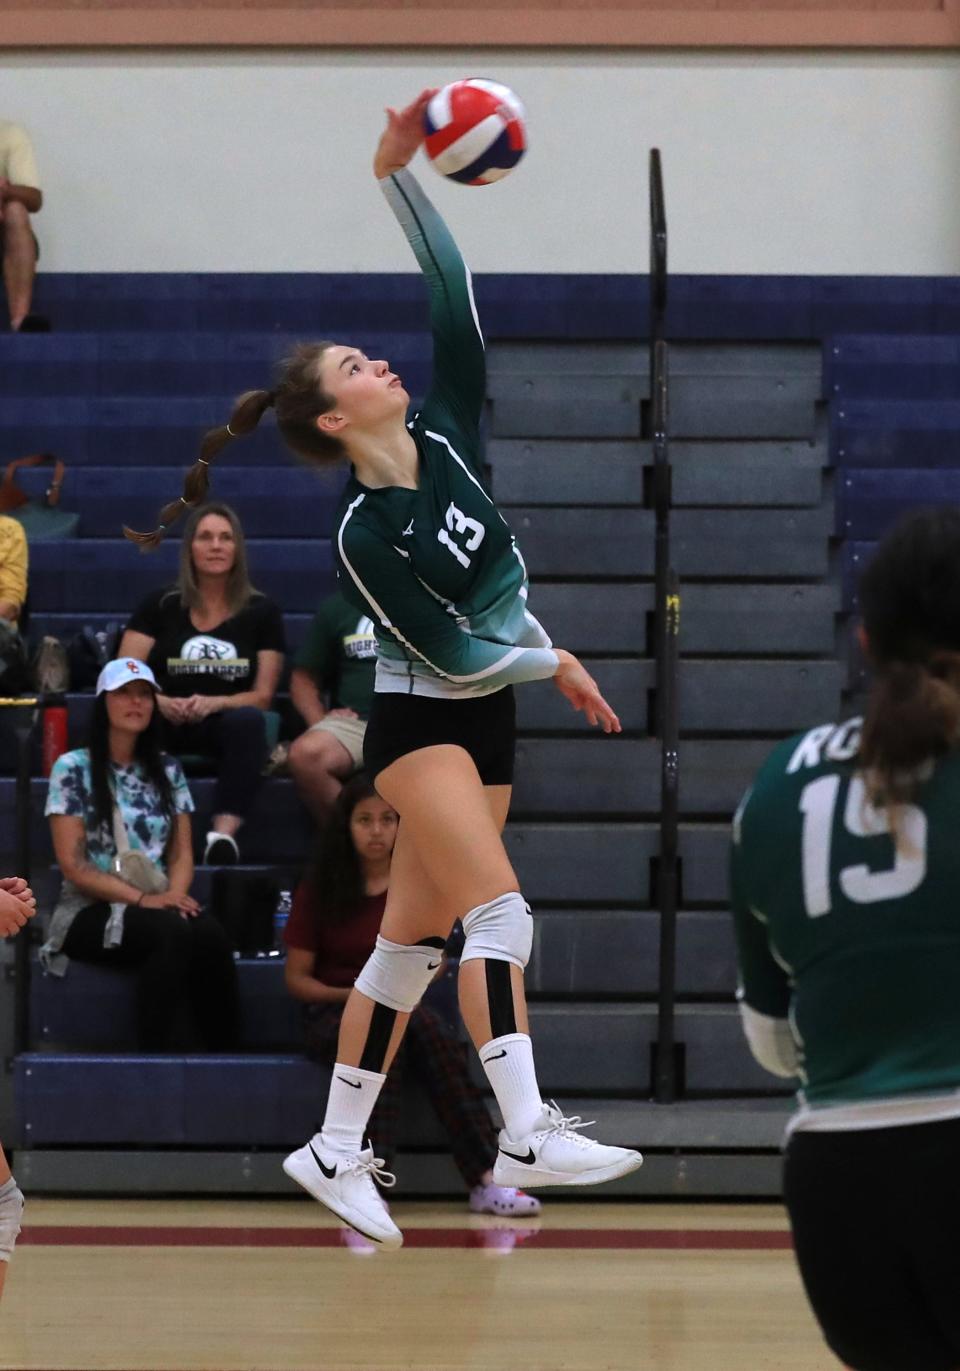 Royal High's Emily Ford goes for the spike during a match against Oxnard on Saturday, Sept. 24, 2022, at Oxnard High.